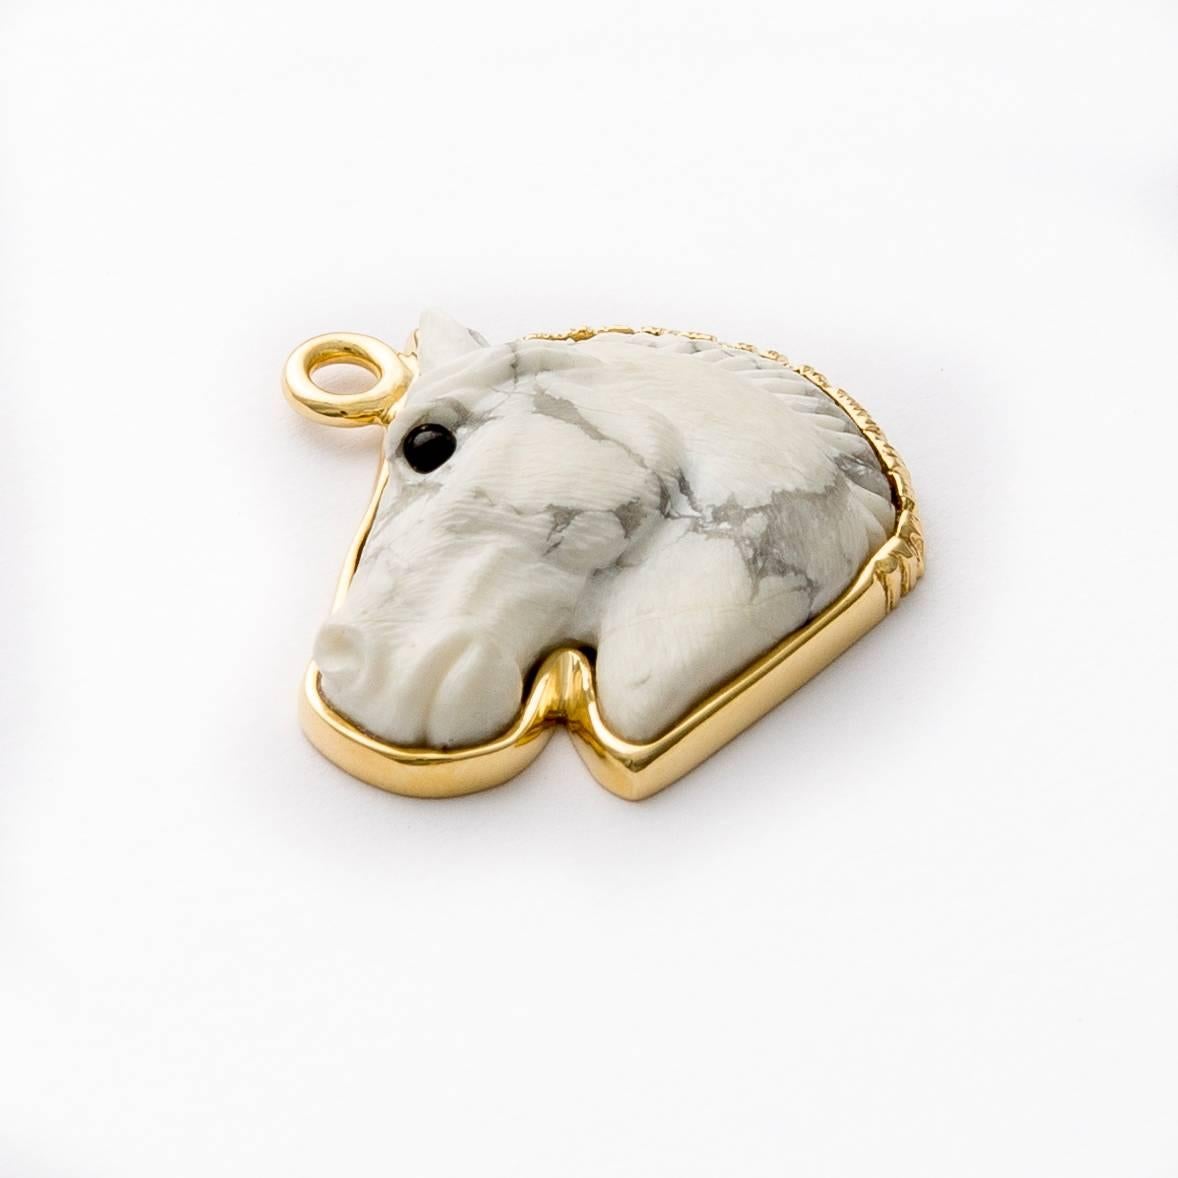 Hand carved howlite horse head pendant with onyx eye in profile set in 18 karat brushed gold frame with loop (carved by Master Idar-Oberstein artist). 
Stone: Natural howlite with light grey veining, size: 28mmx22mmx5mm.
Gold detachable enhancer